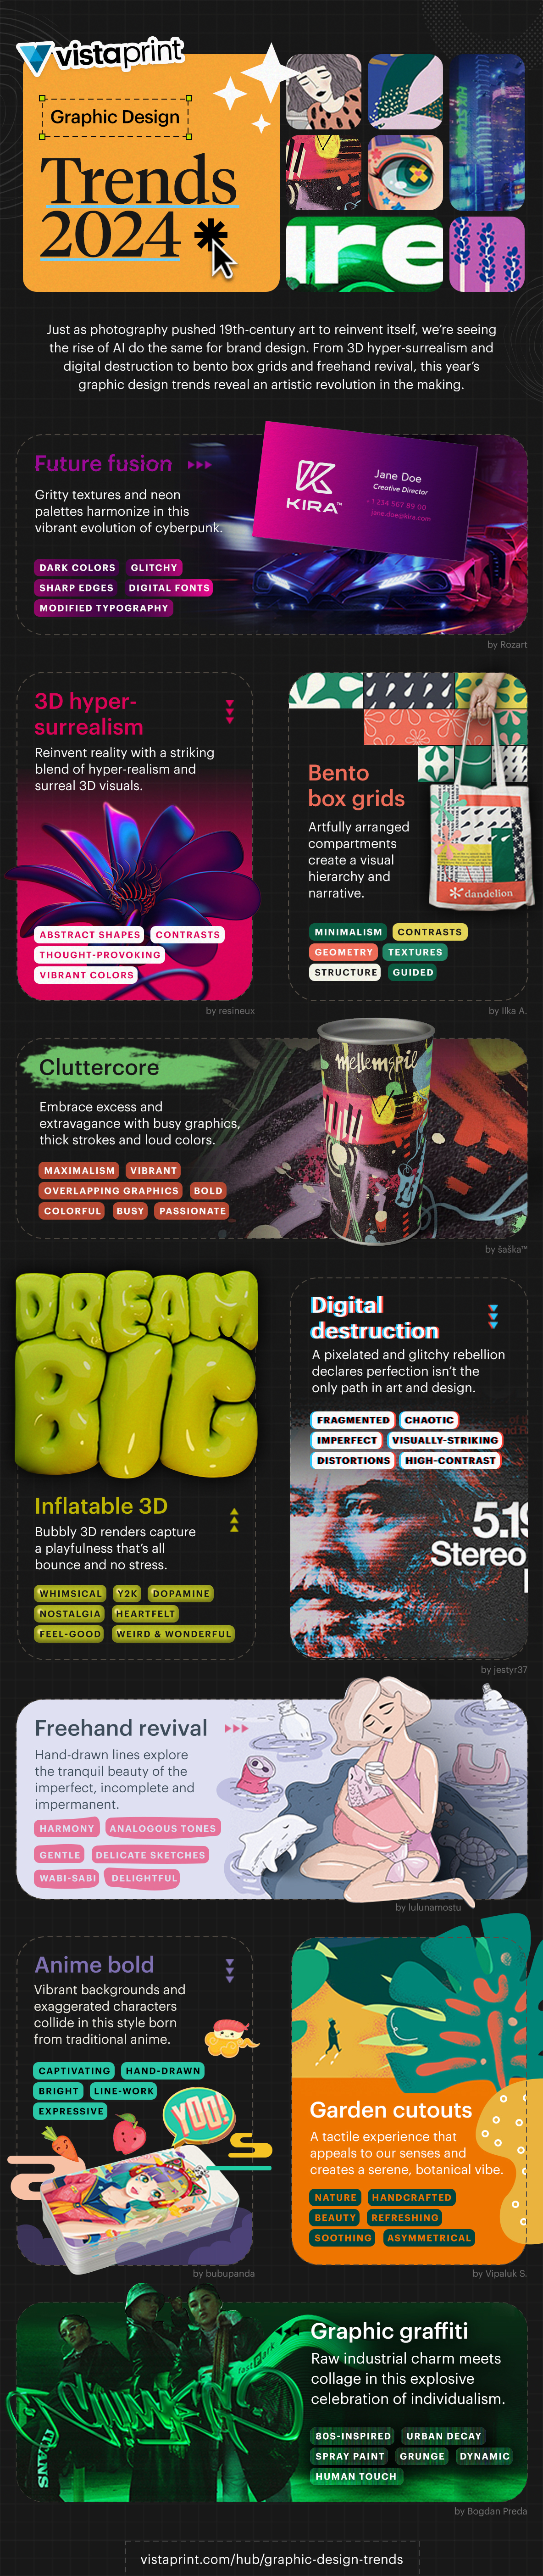 Graphic Design Trends for 2024